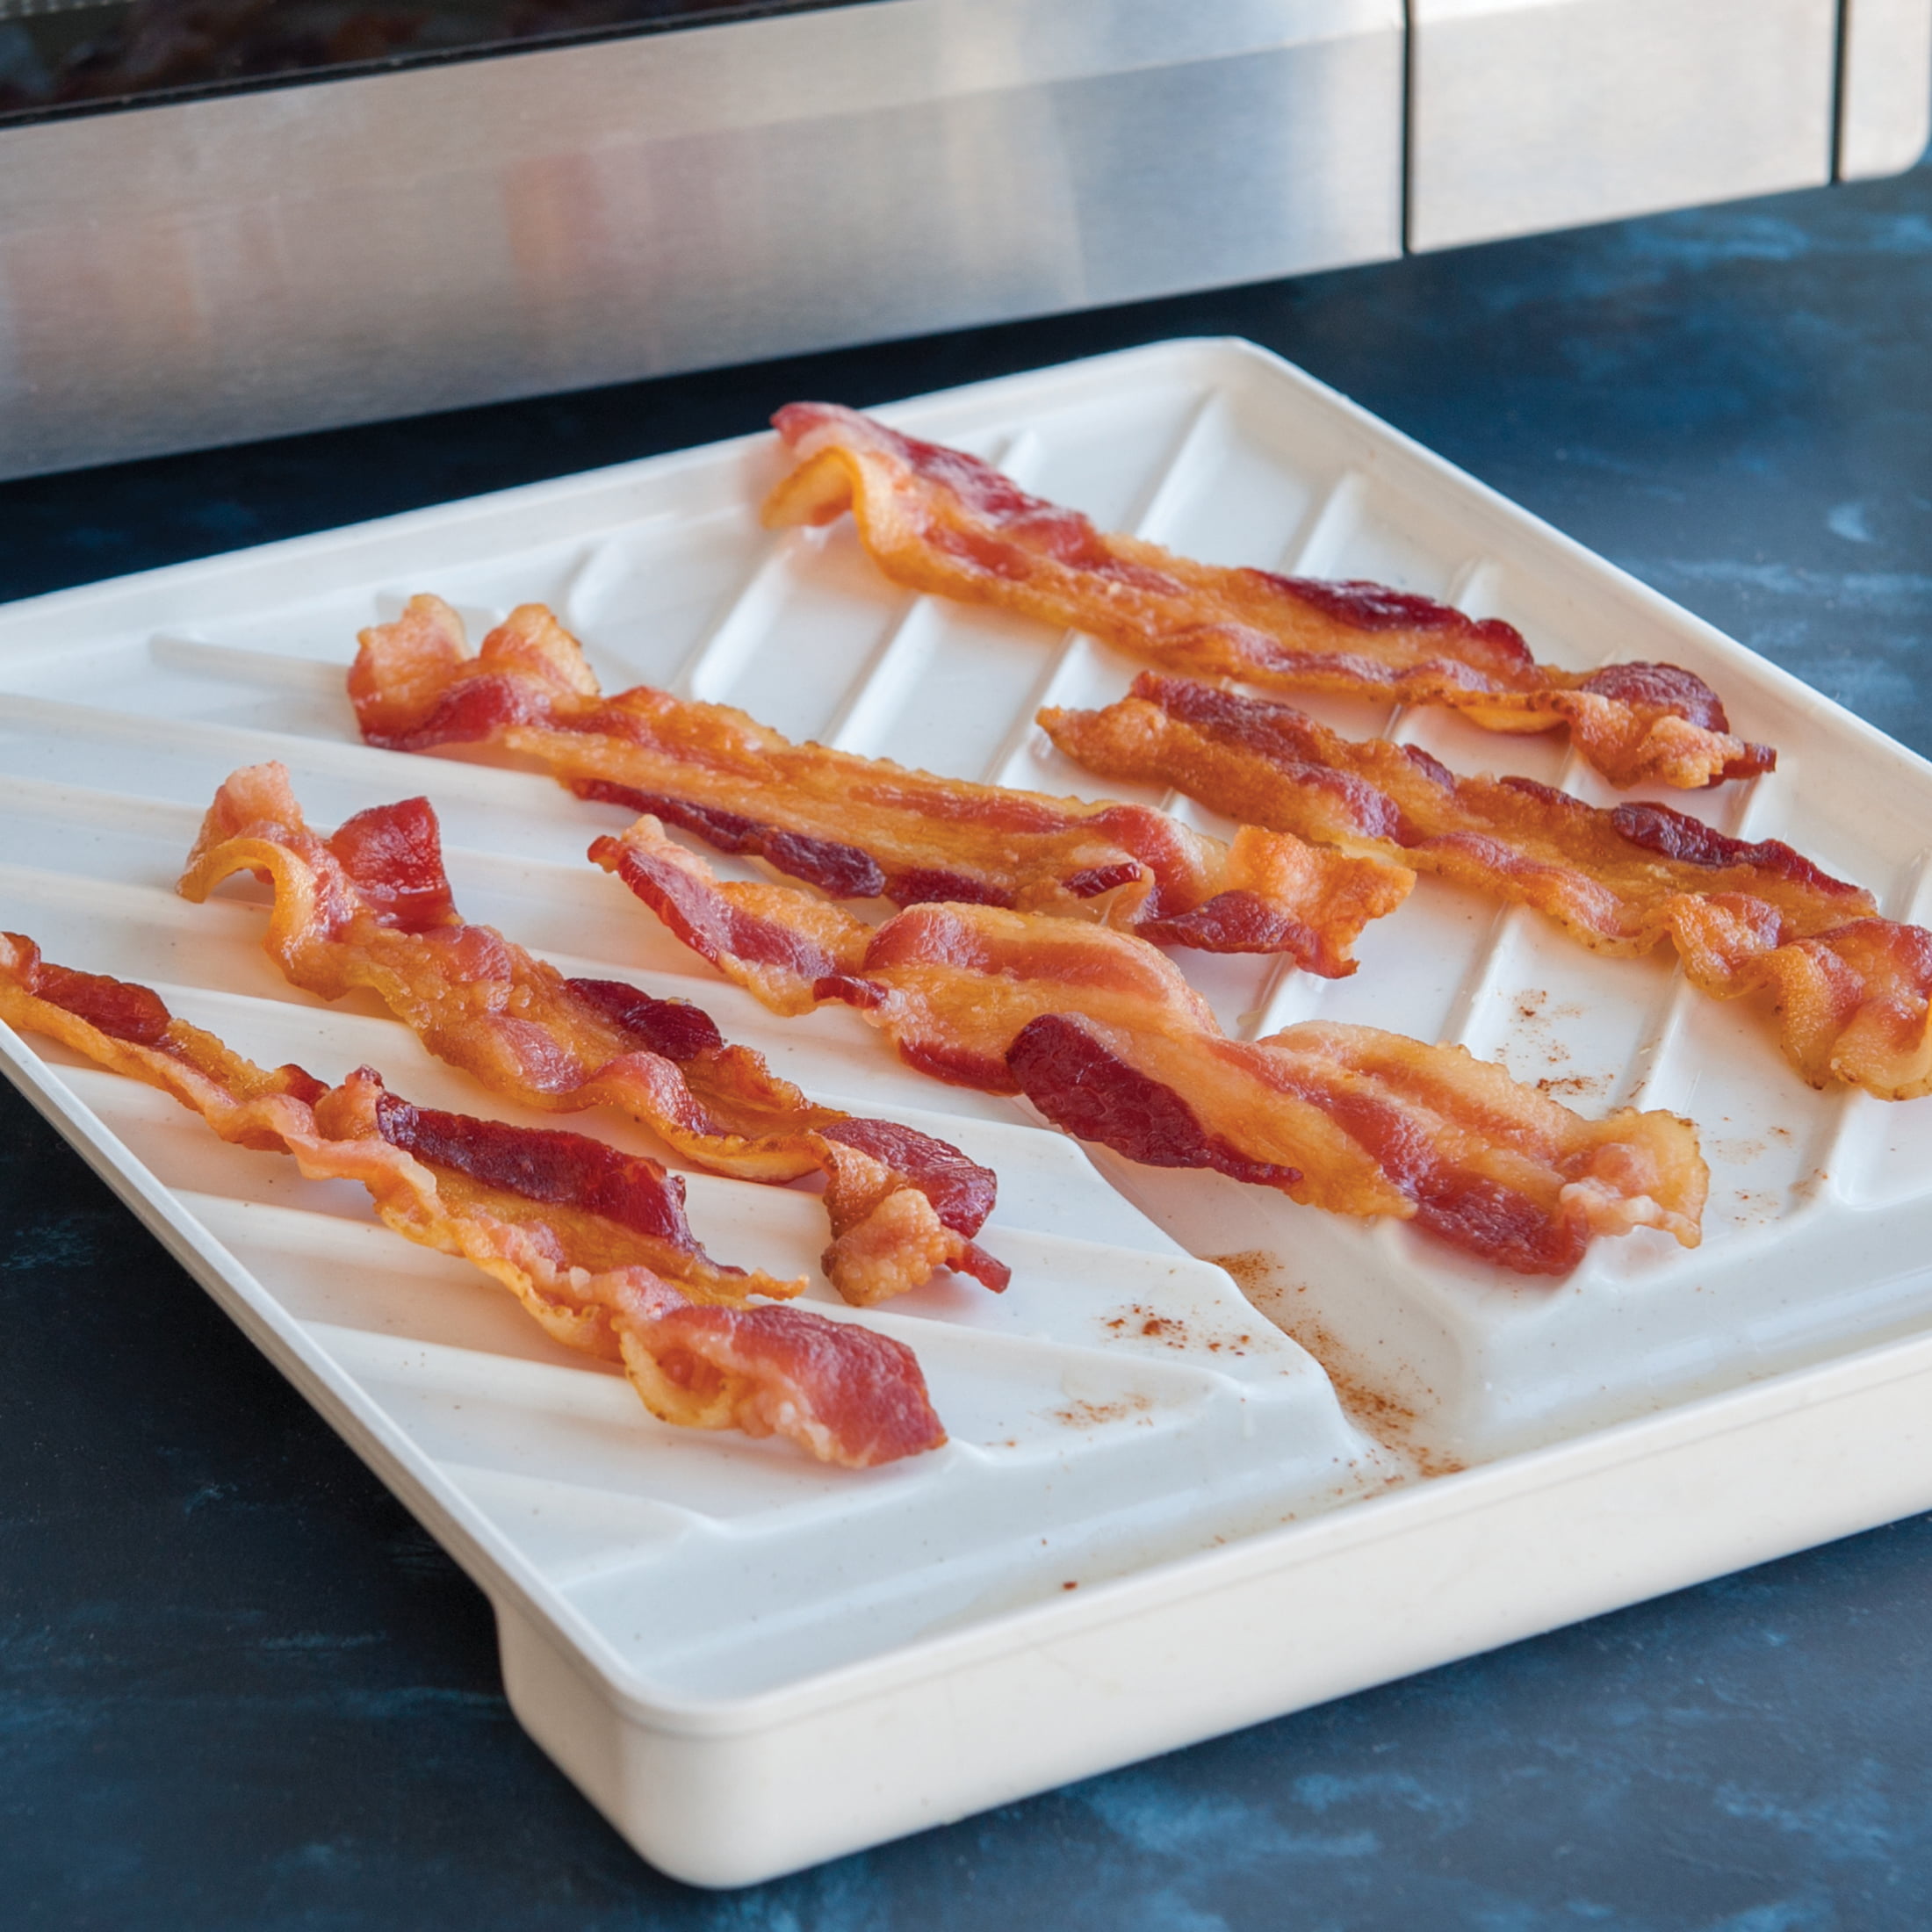 Nordic Ware Microwave Slanted Bacon Tray With Lid